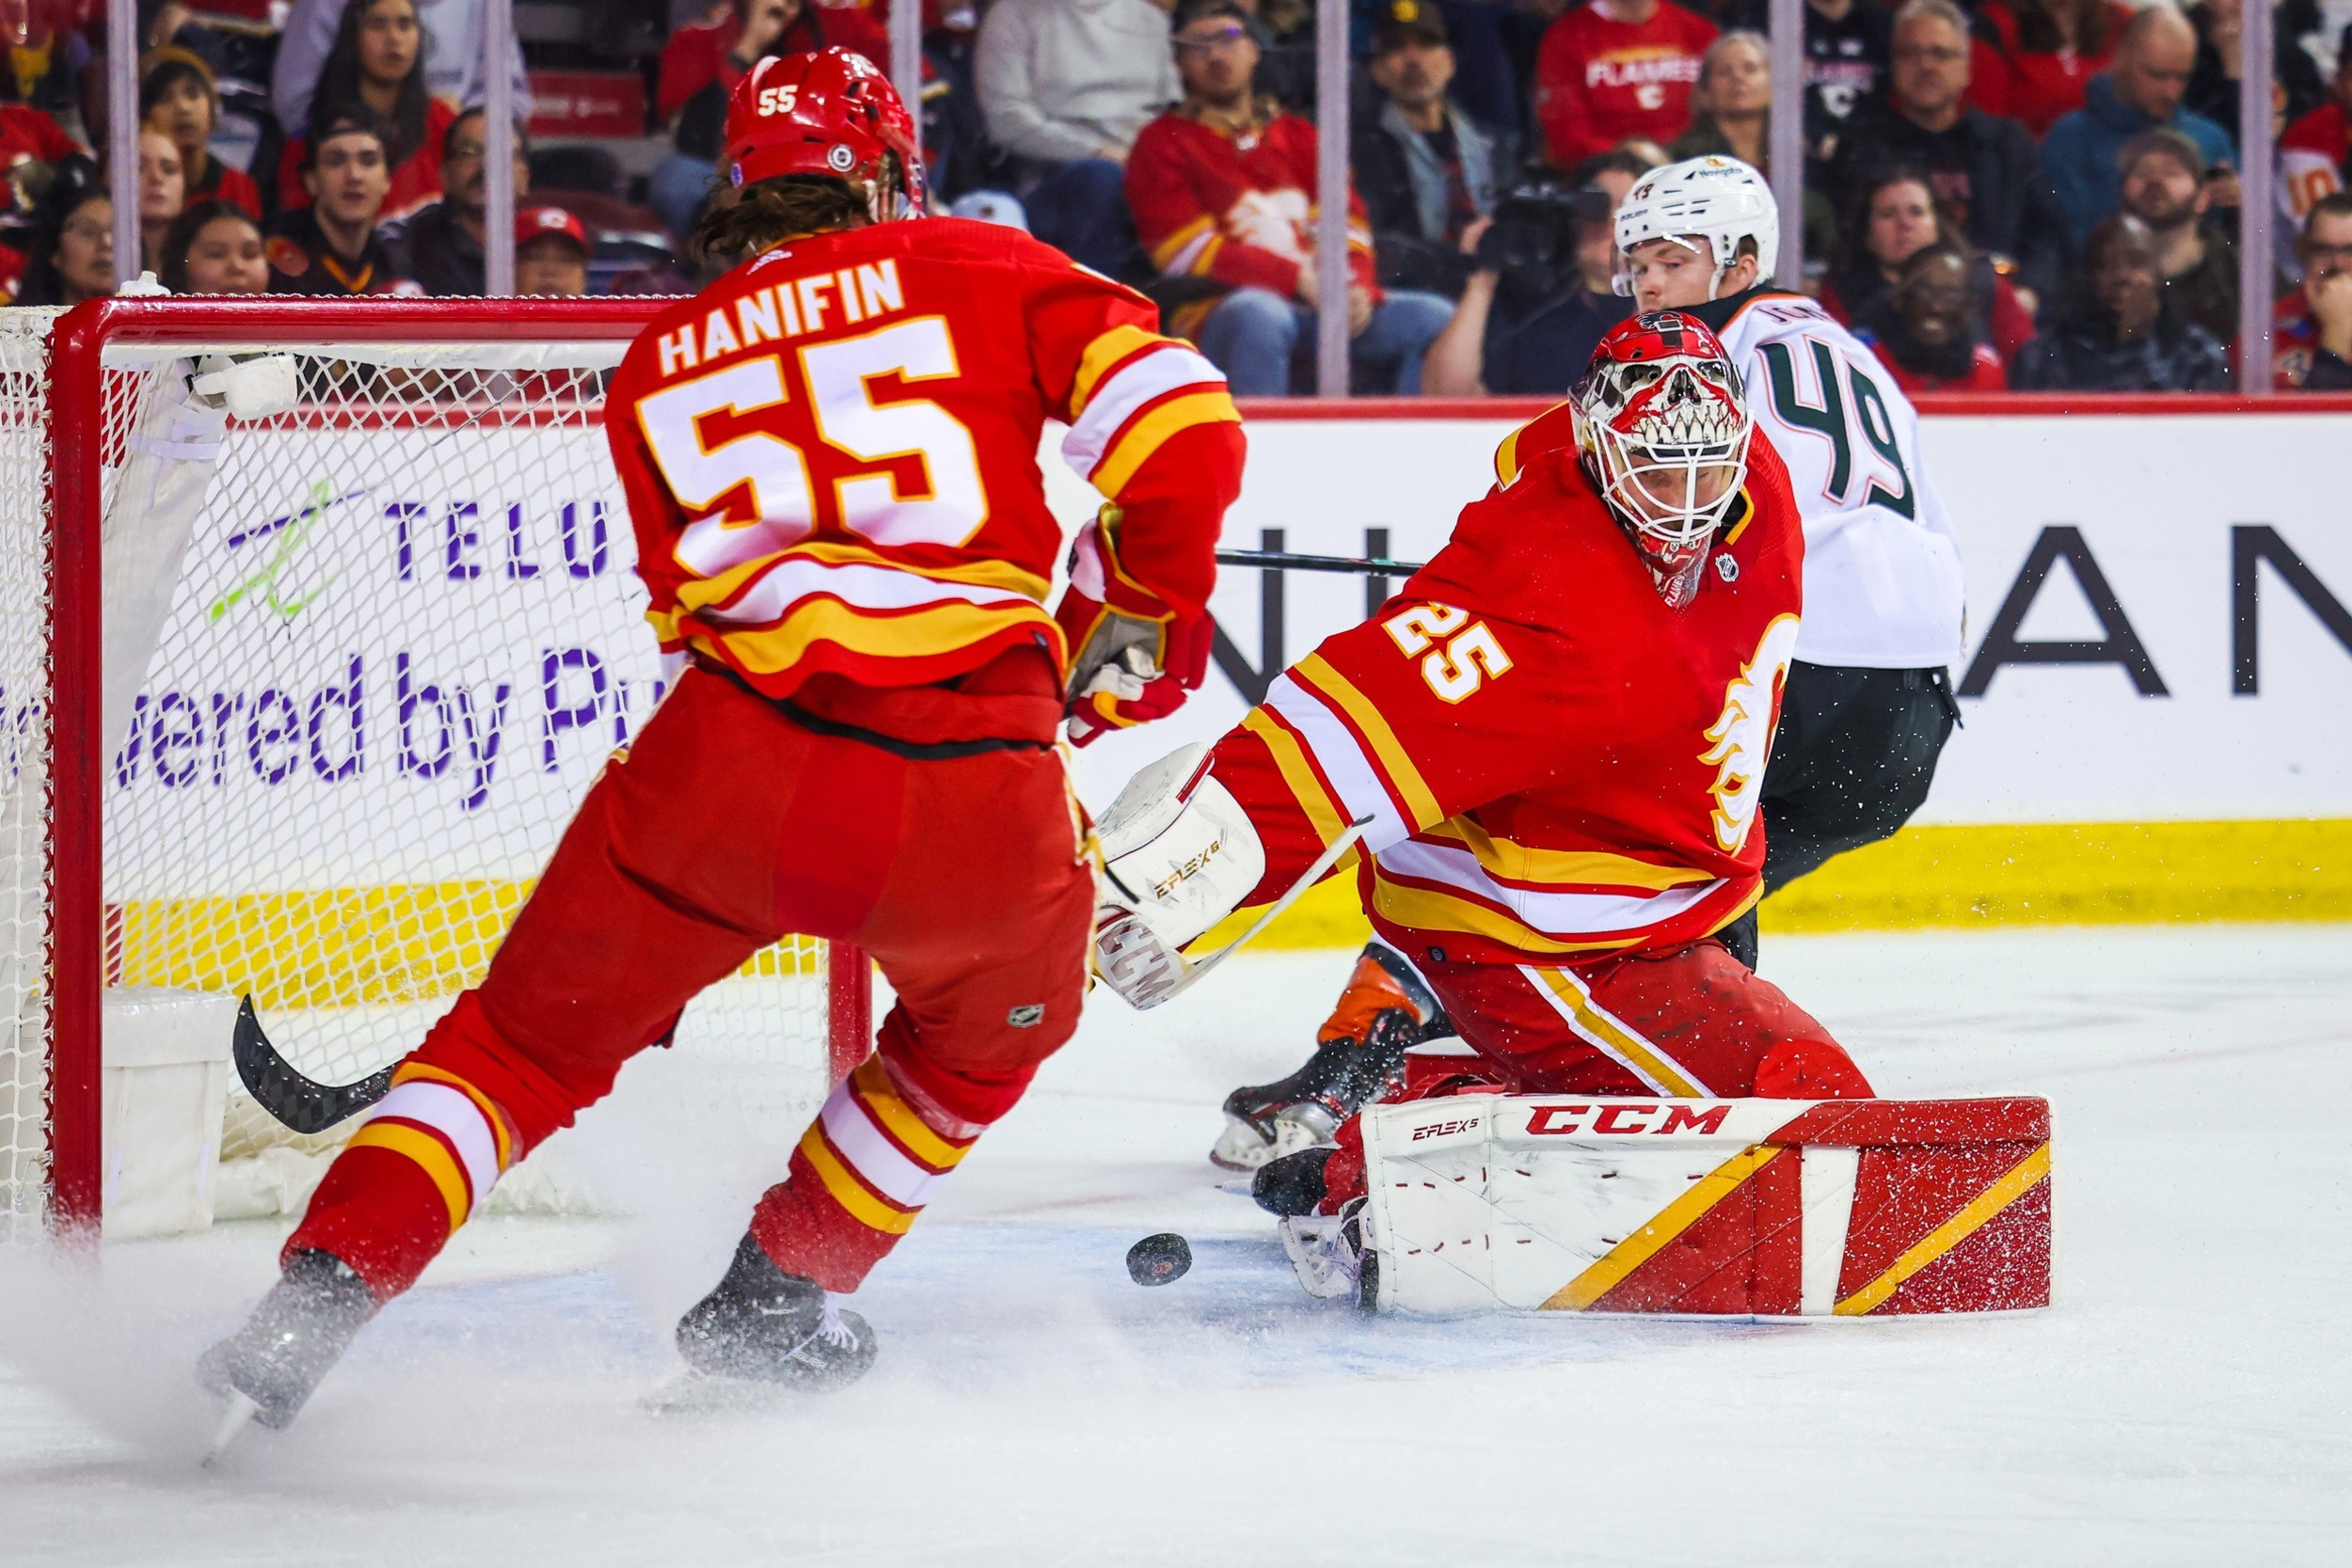 Andrew Mangiapane scores late to lift Flames over Ducks 2-1